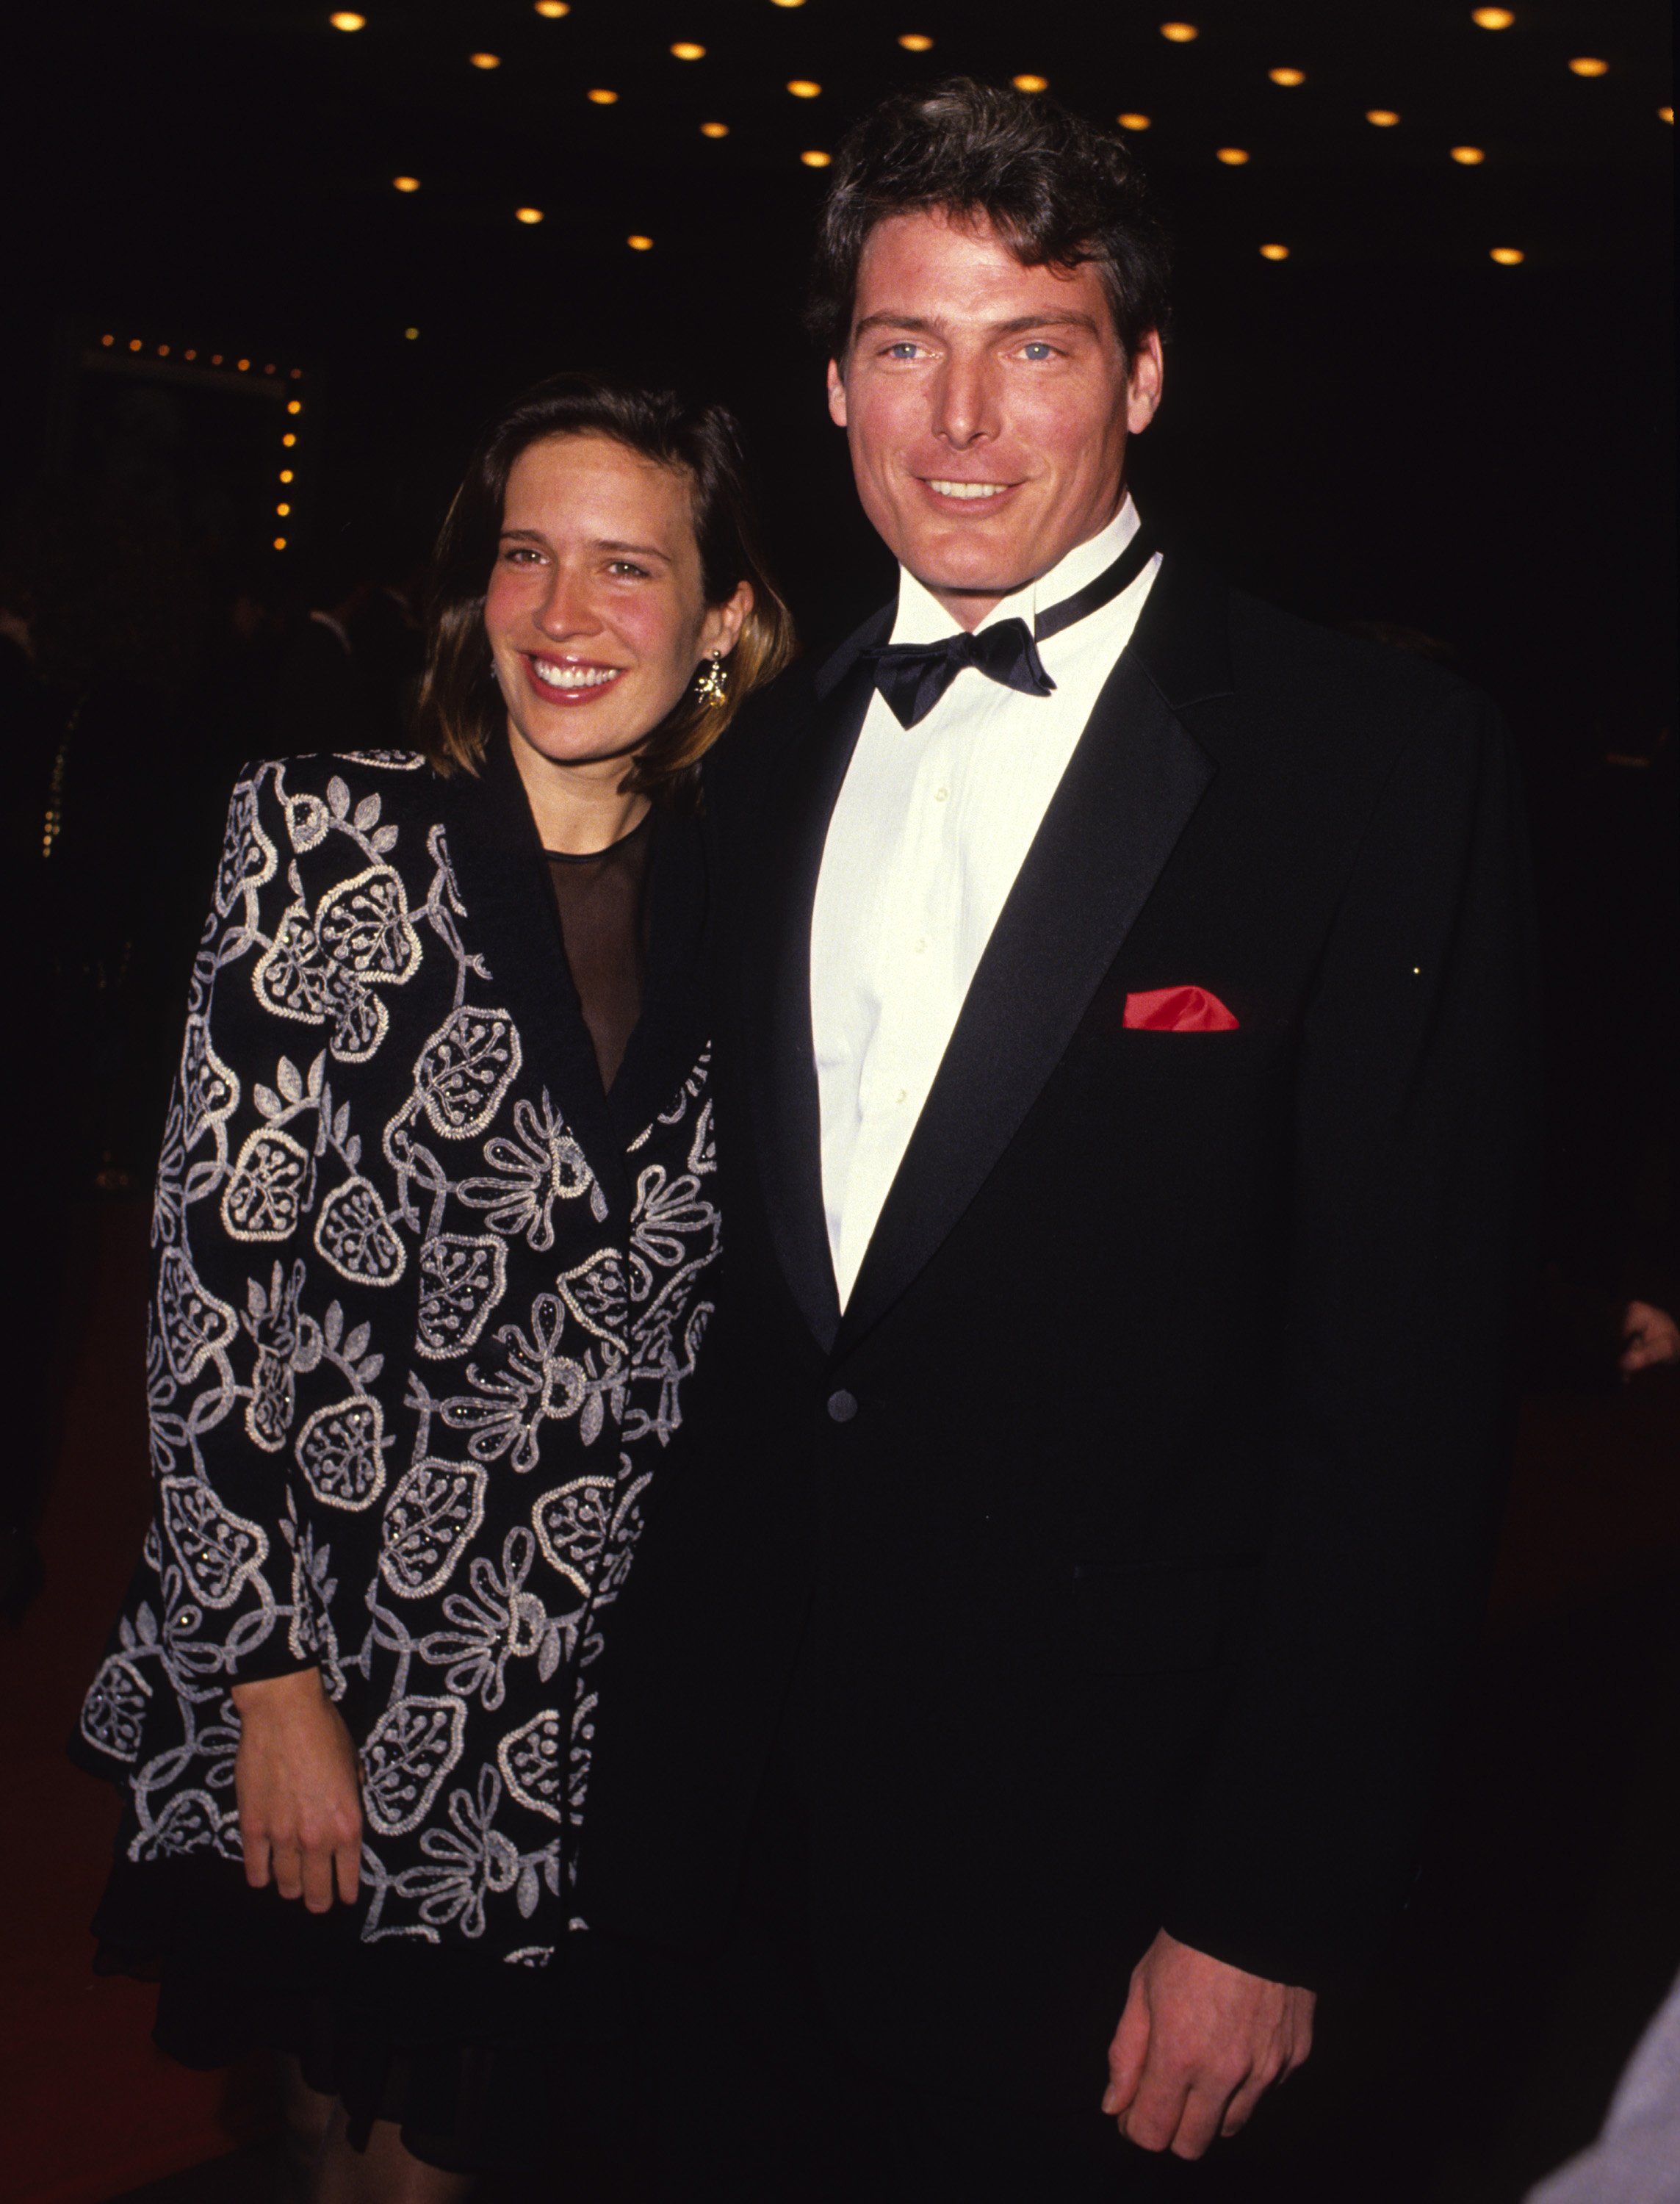 Christopher Reeve and Wife Dana during Christopher Reeve File Photos in Los Angeles, California, United States | Source: Getty Images